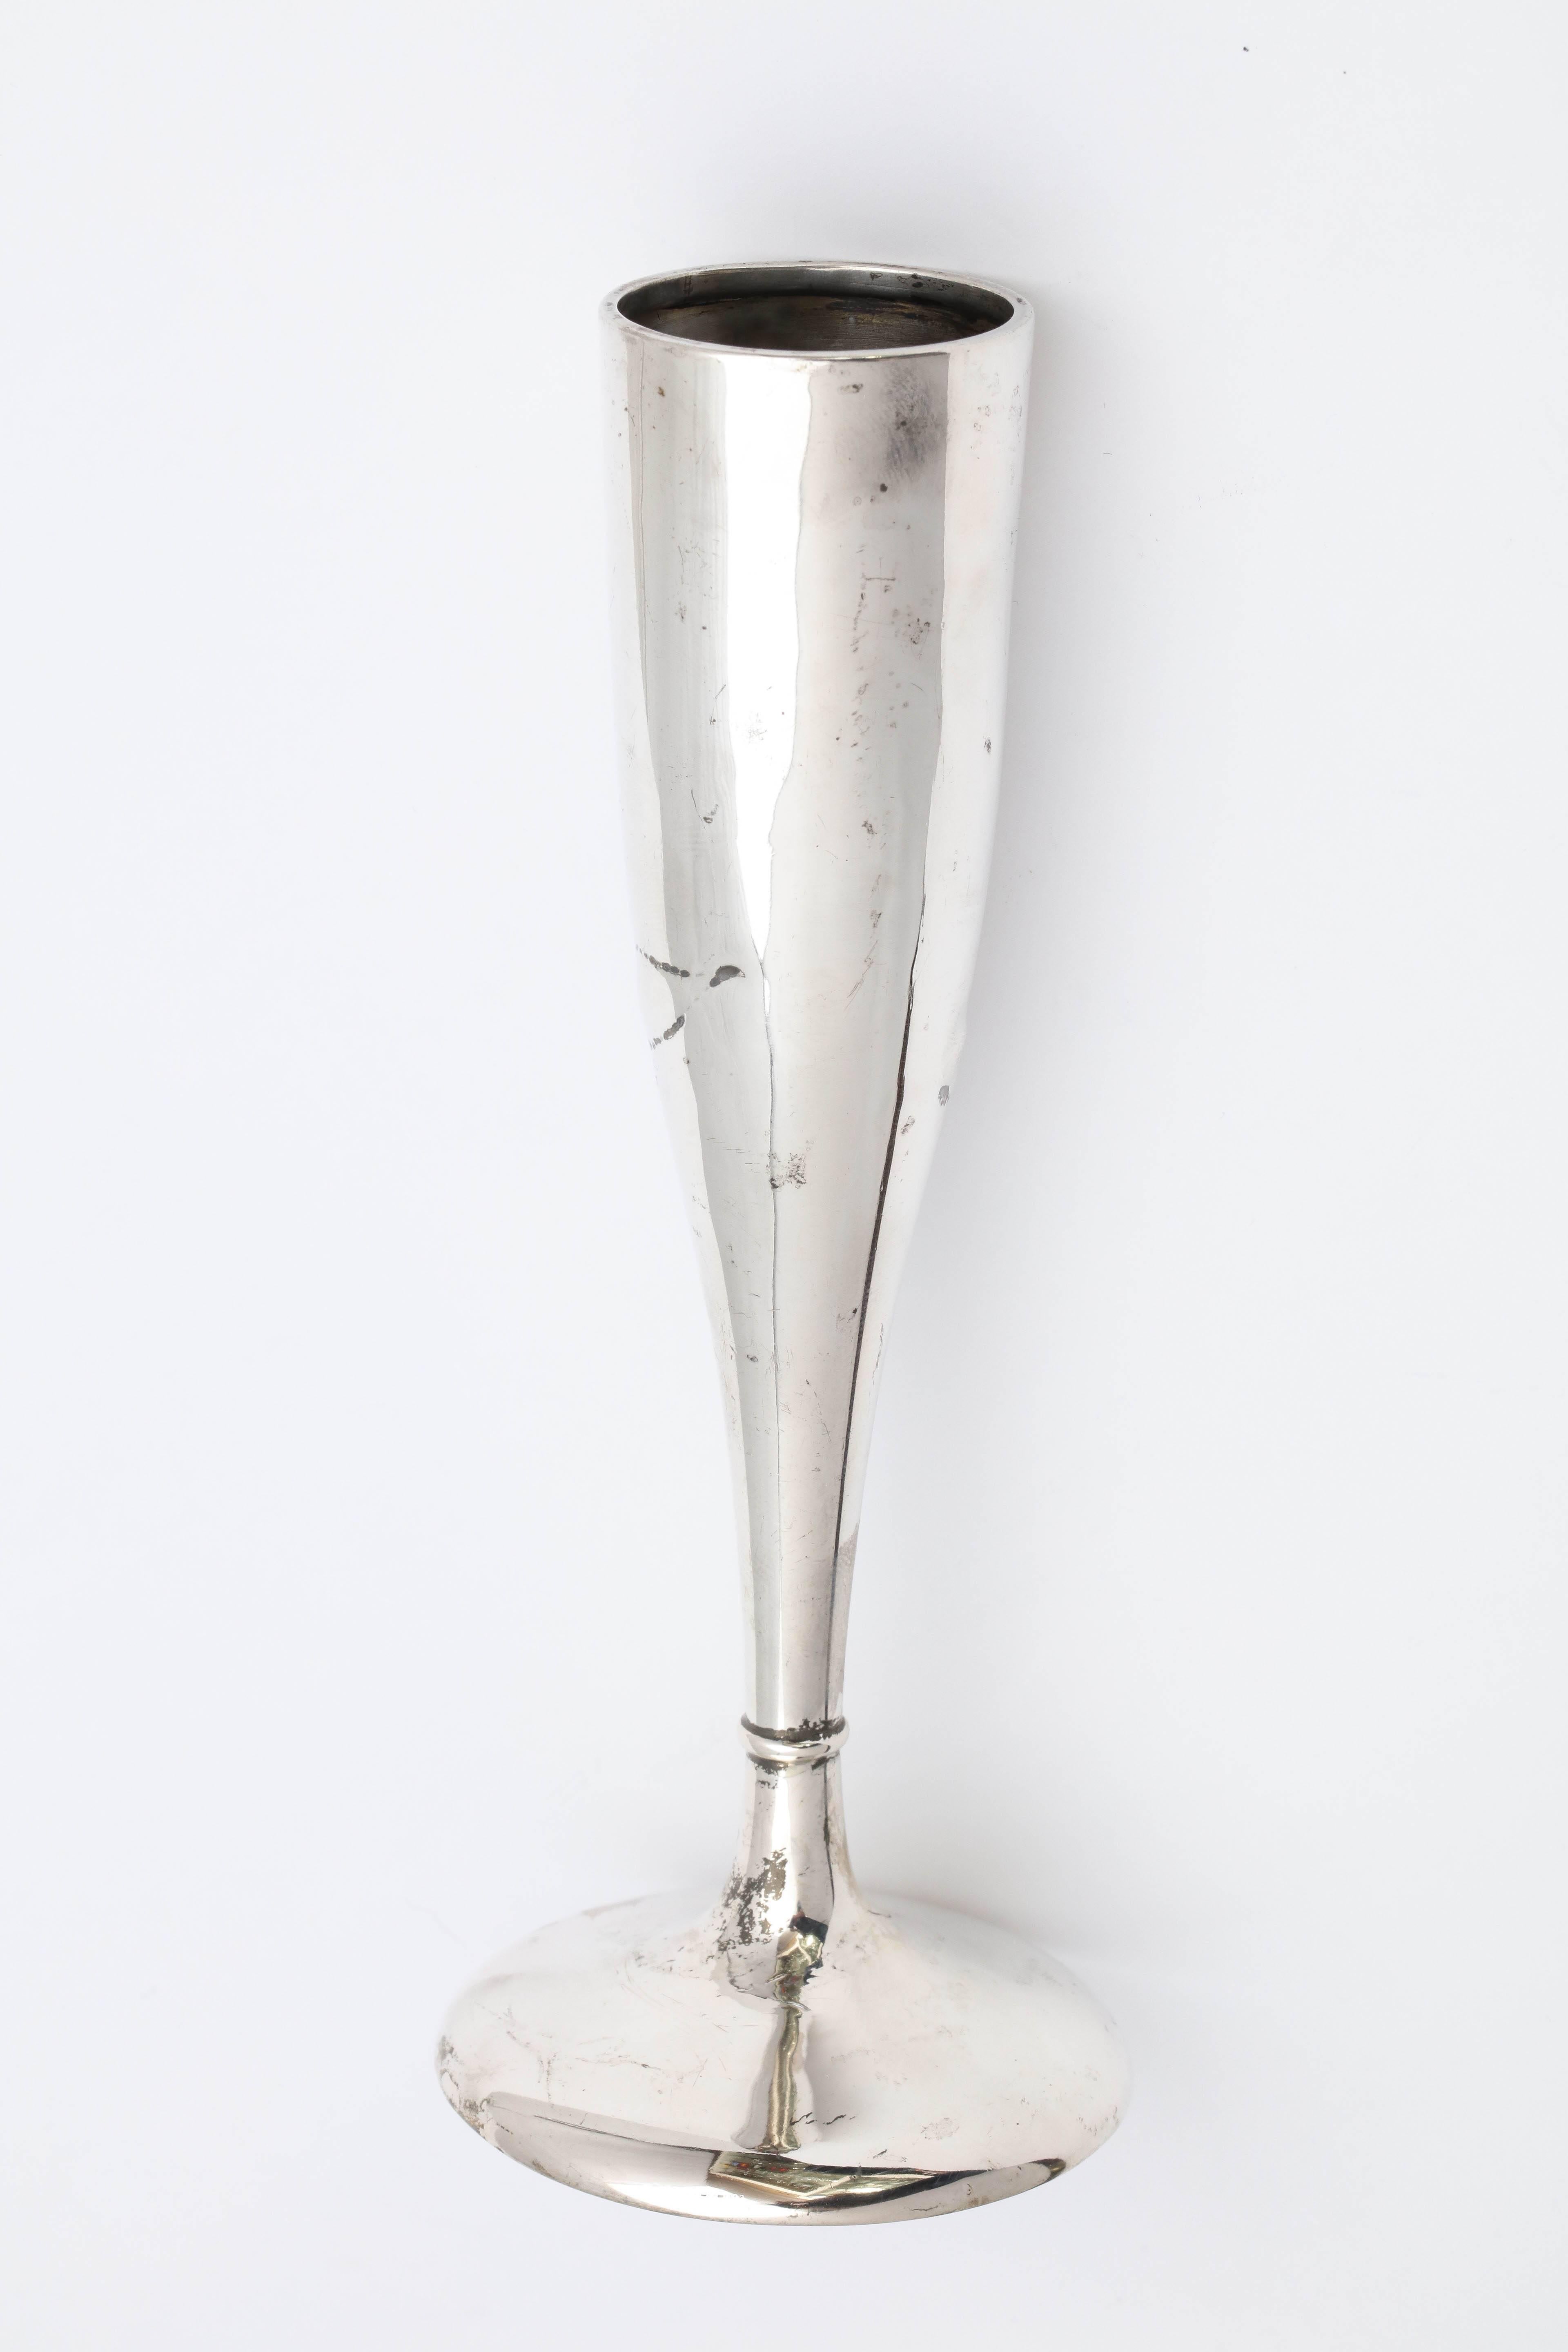 Early 20th Century Art Nouveau Sterling Silver Bud Vase